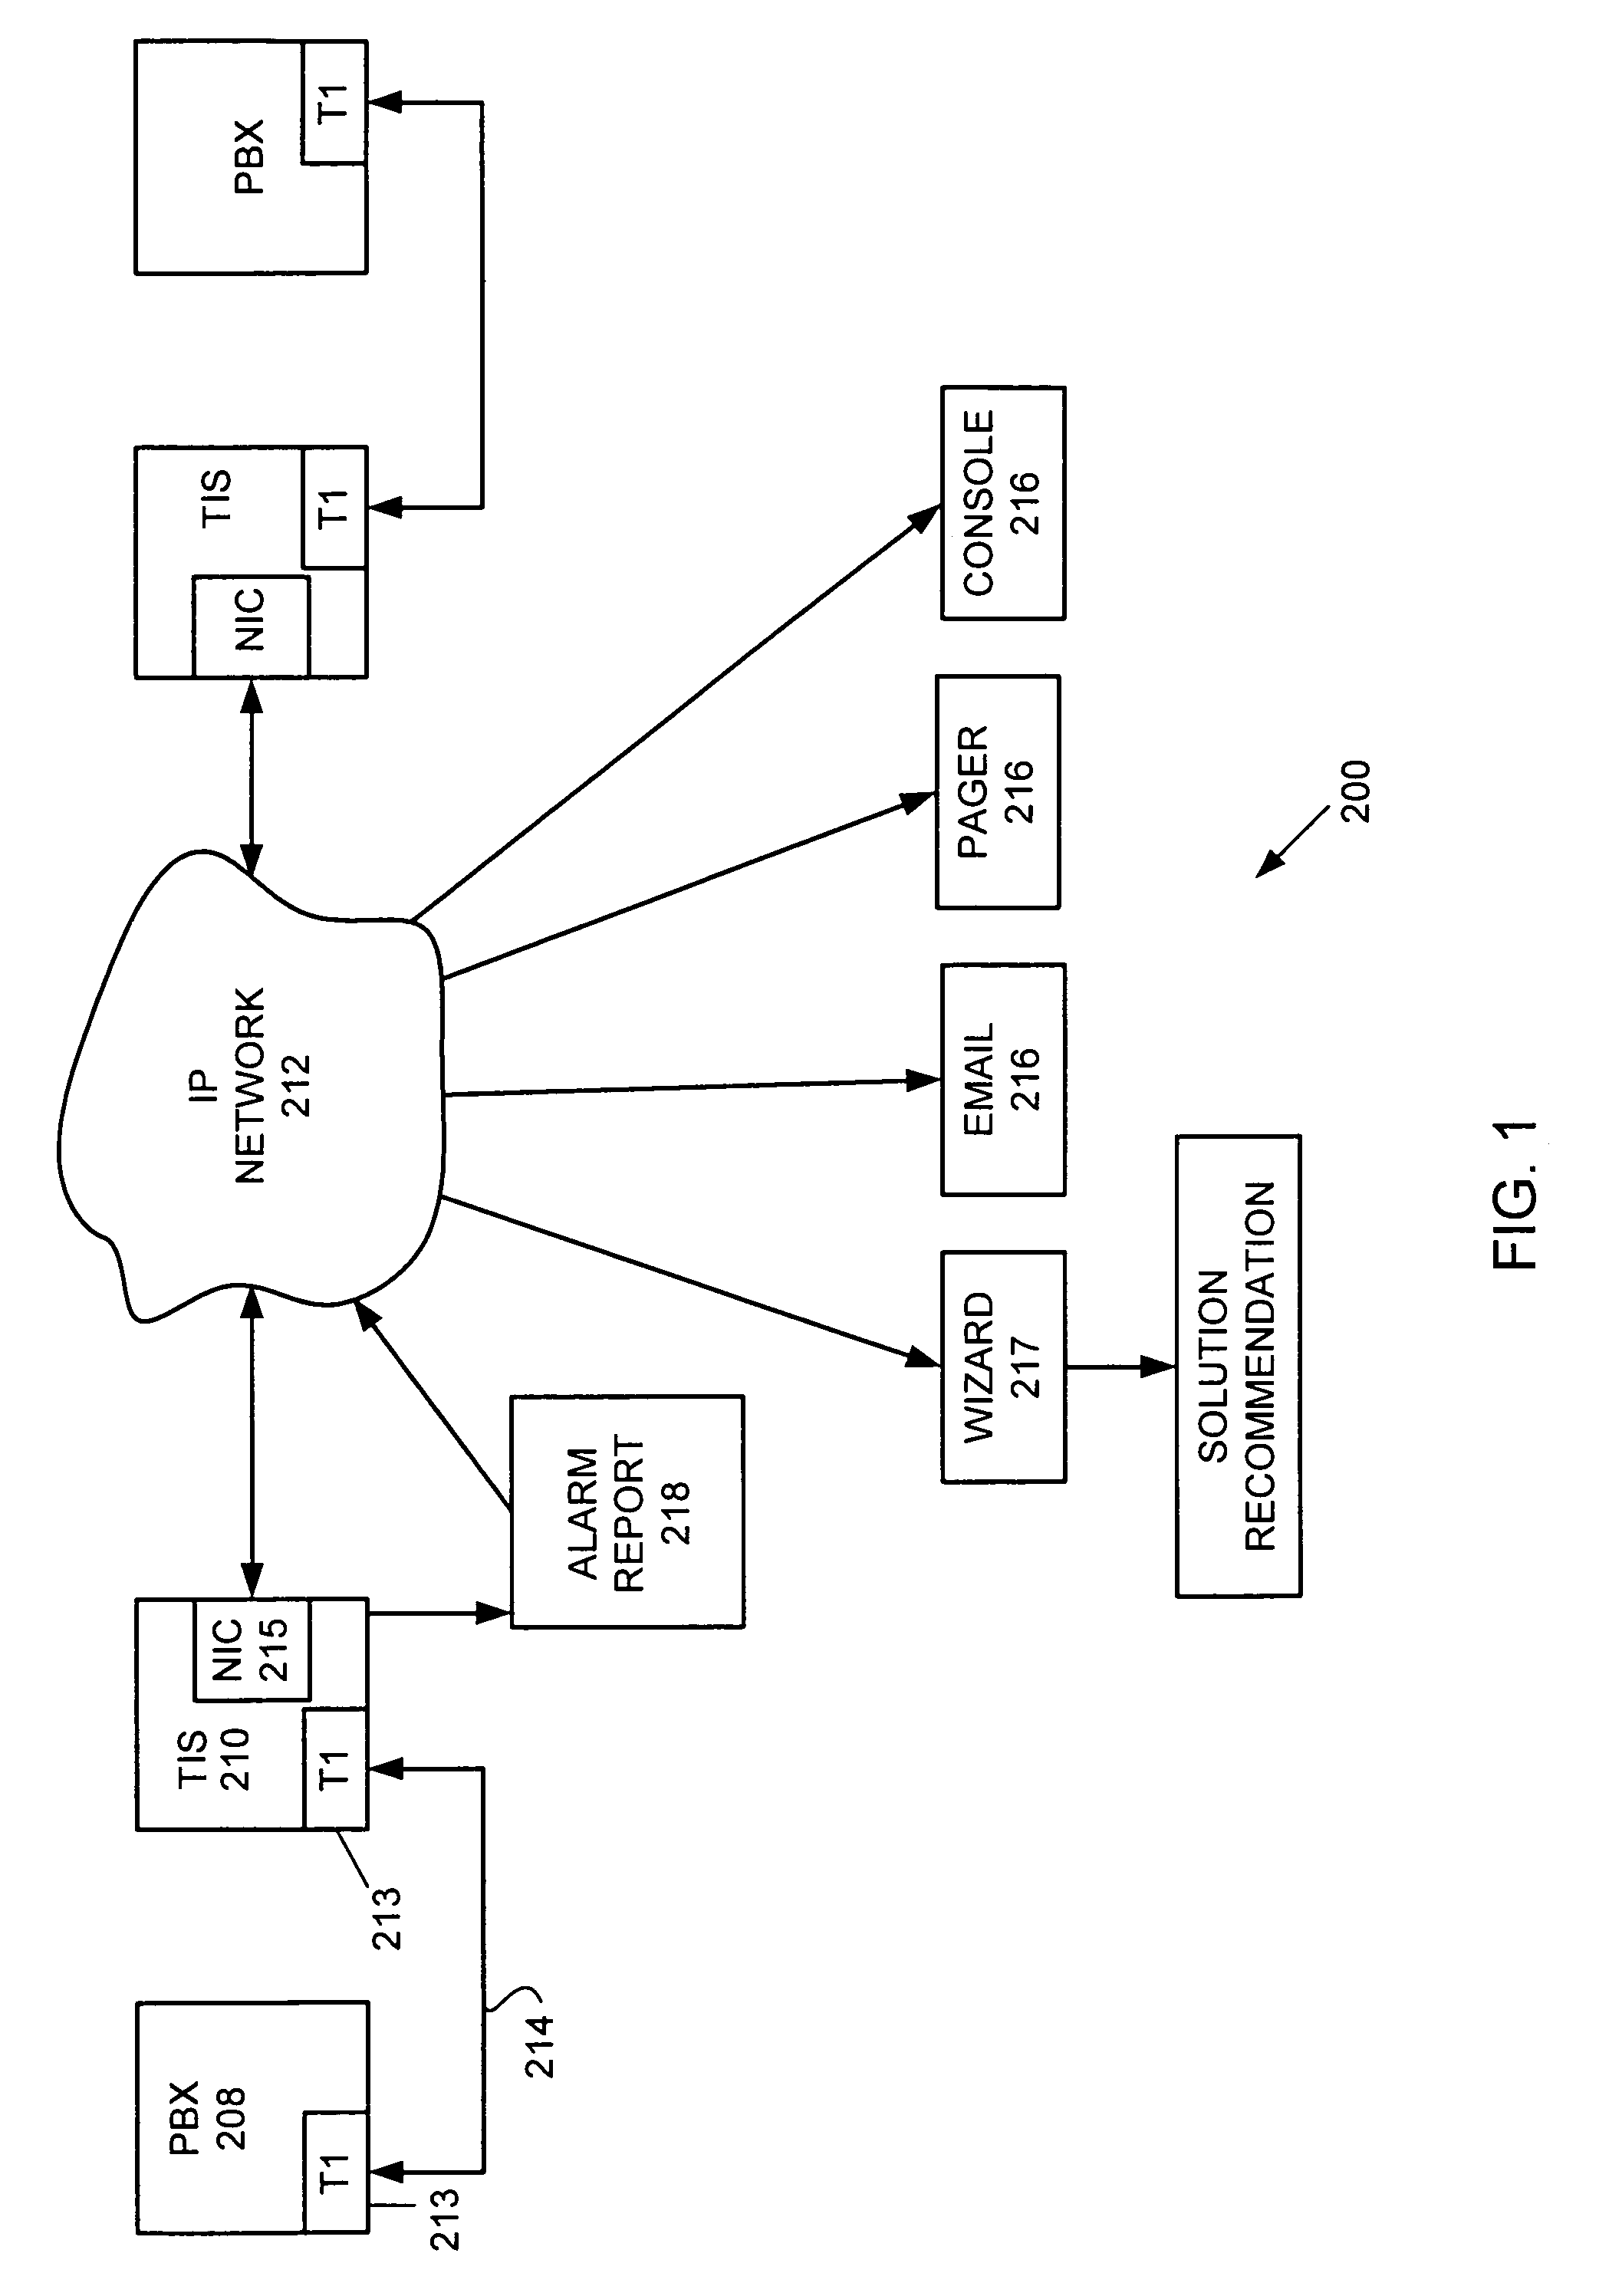 Method and apparatus for automatically reporting of faults in a communication network